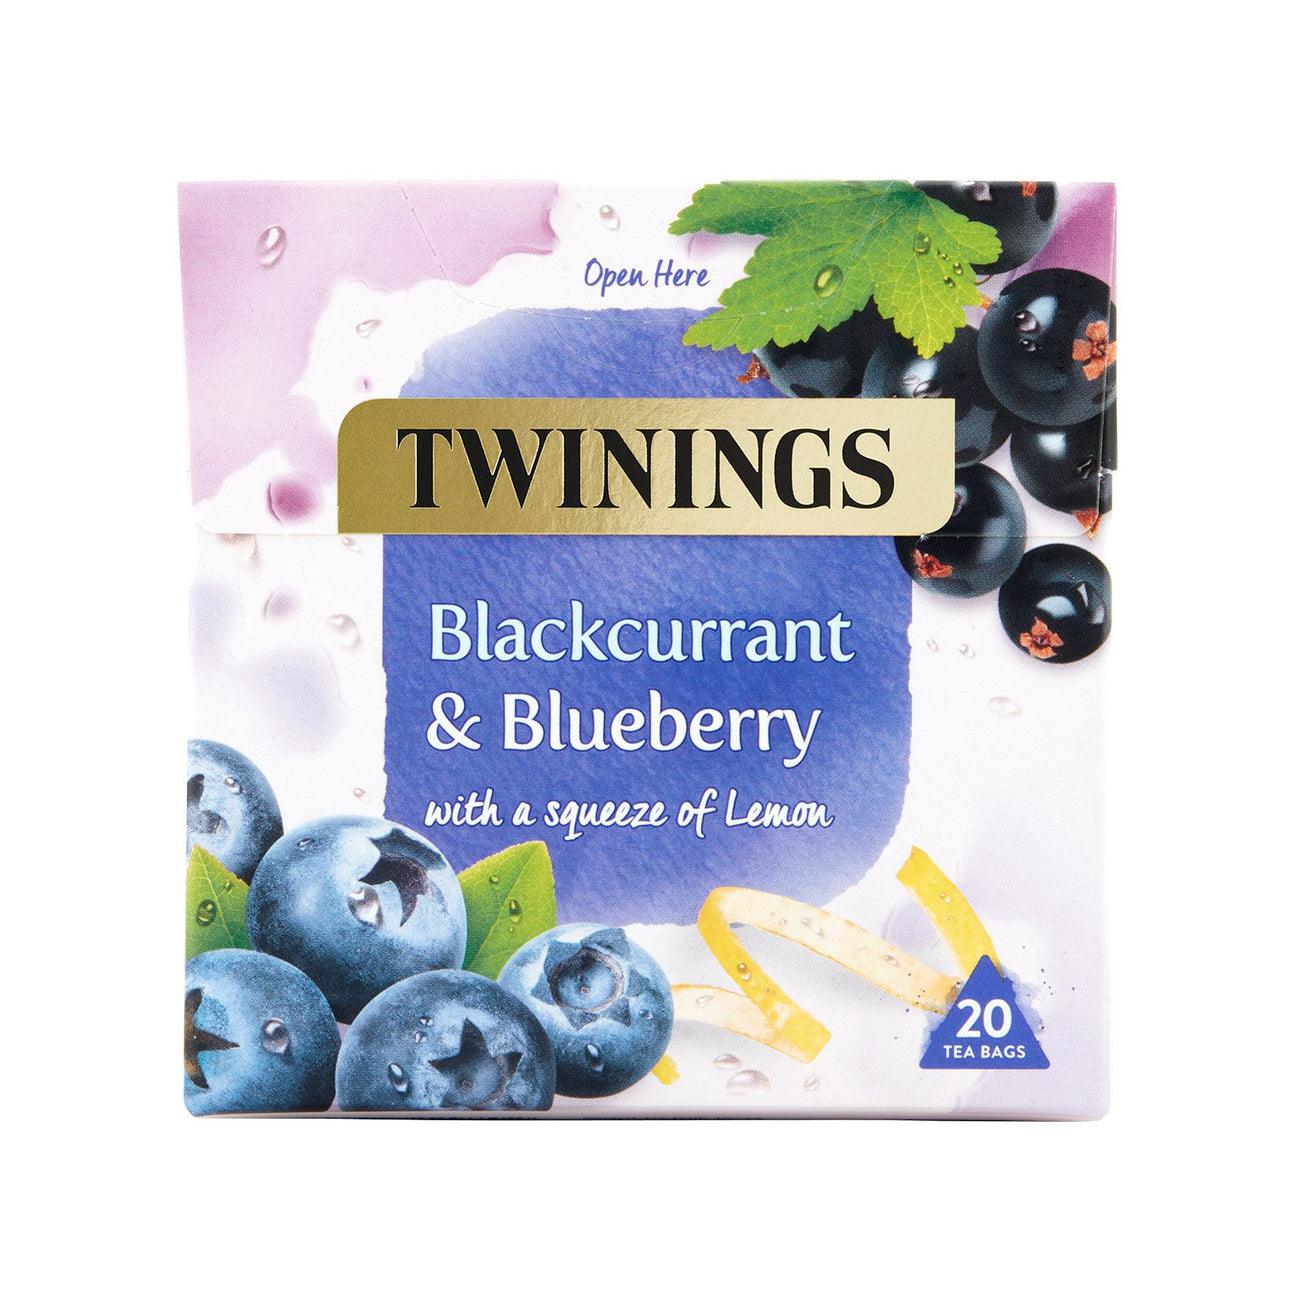 Twinings - Blackcurrant & Blueberry Tea Bags (Non Enveloped) Pack of 20 Tea Bags - Vending Superstore